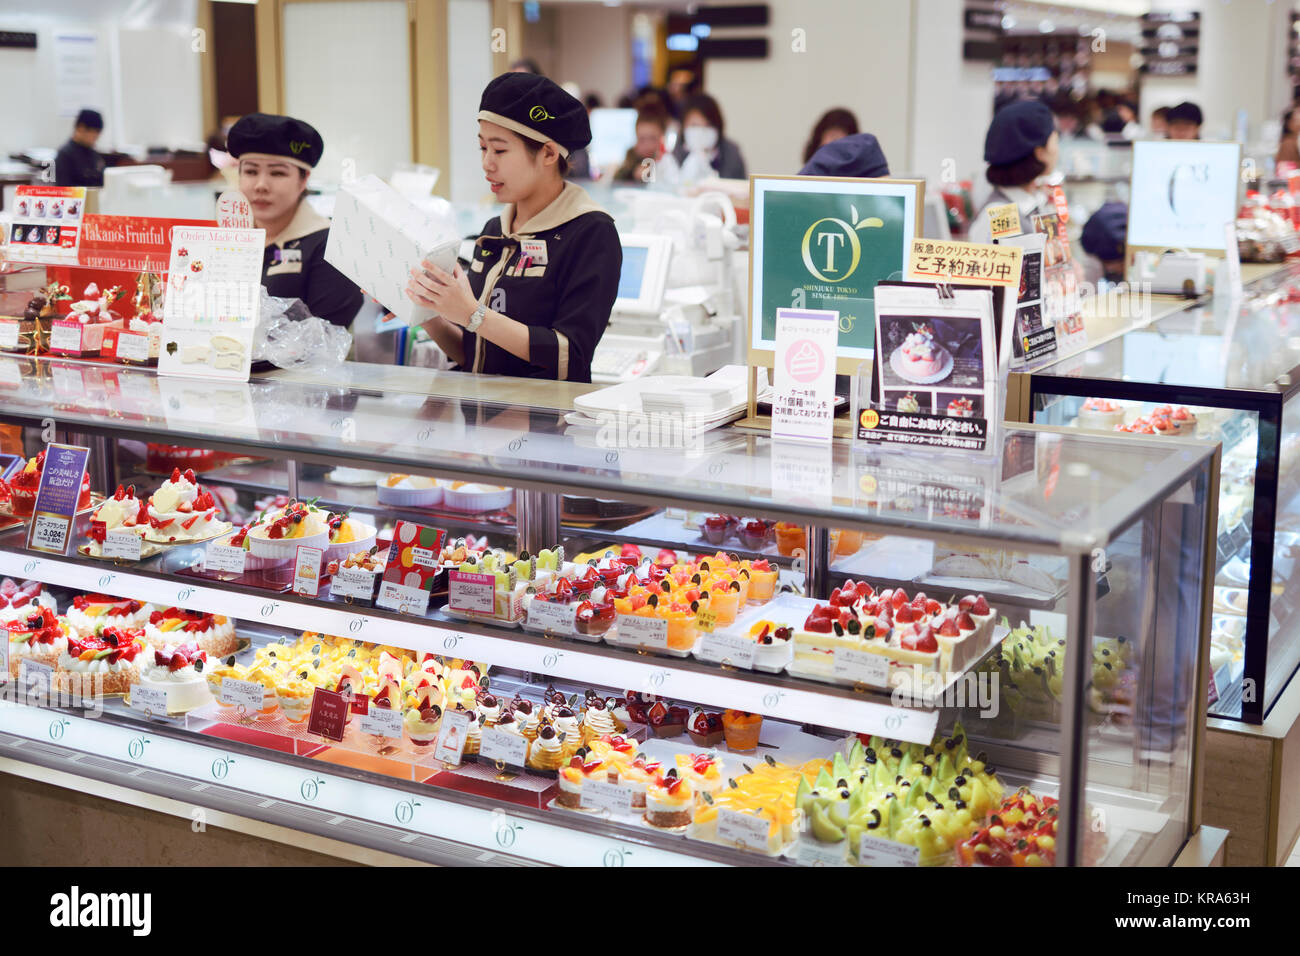 Patisserie shop food stand with cakes and desserts on display in a Japanese food hall in Osaka, Japan 2017 Stock Photo